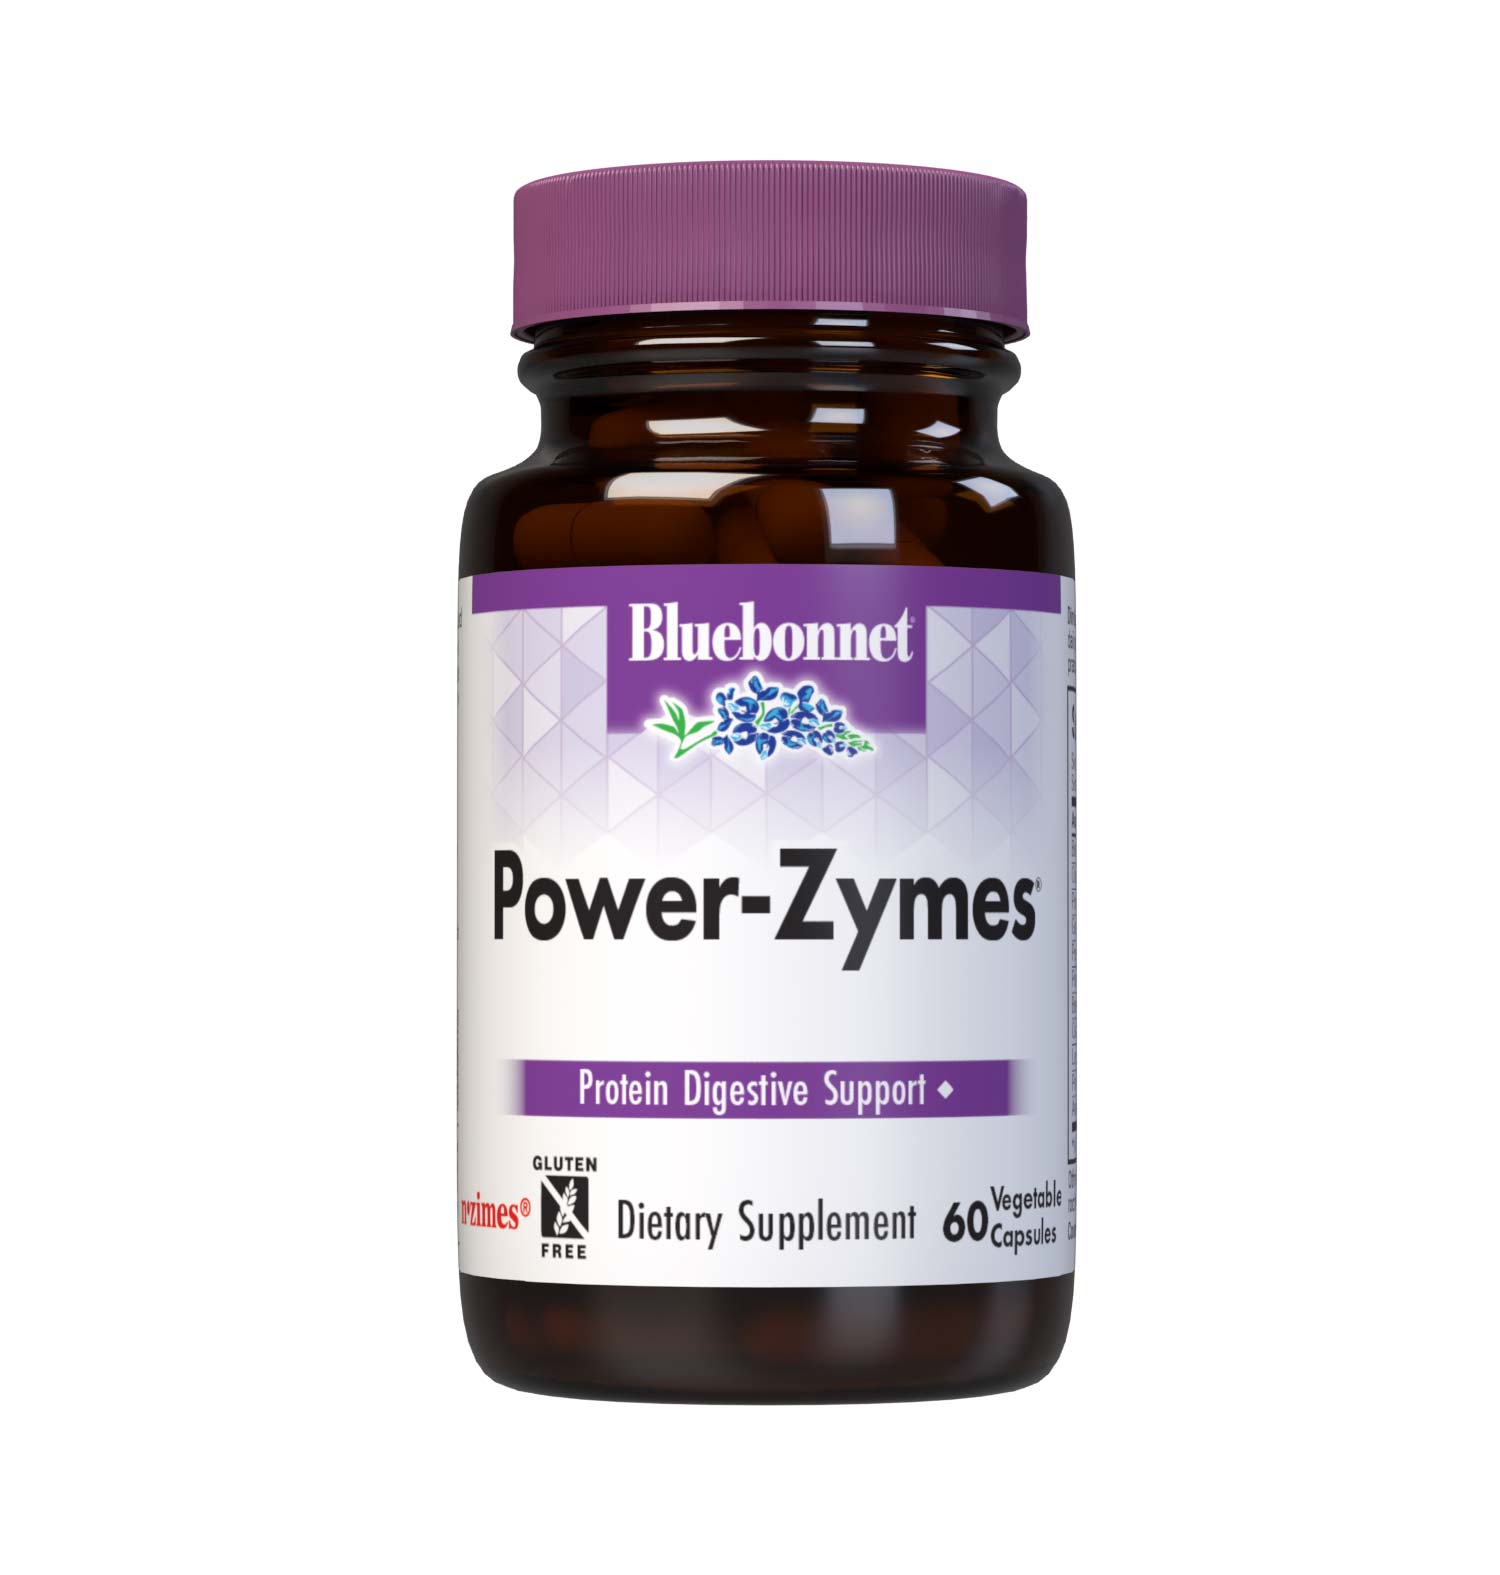 Bluebonnet’s Power-Zymes 60 Vegetable Capsules are formulated with digestive enzymes to help break down of a diet high in protein with some carbohydrates and fats. Each capsule also delivers ginger and peppermint to help soothe digestion. #size_60 count